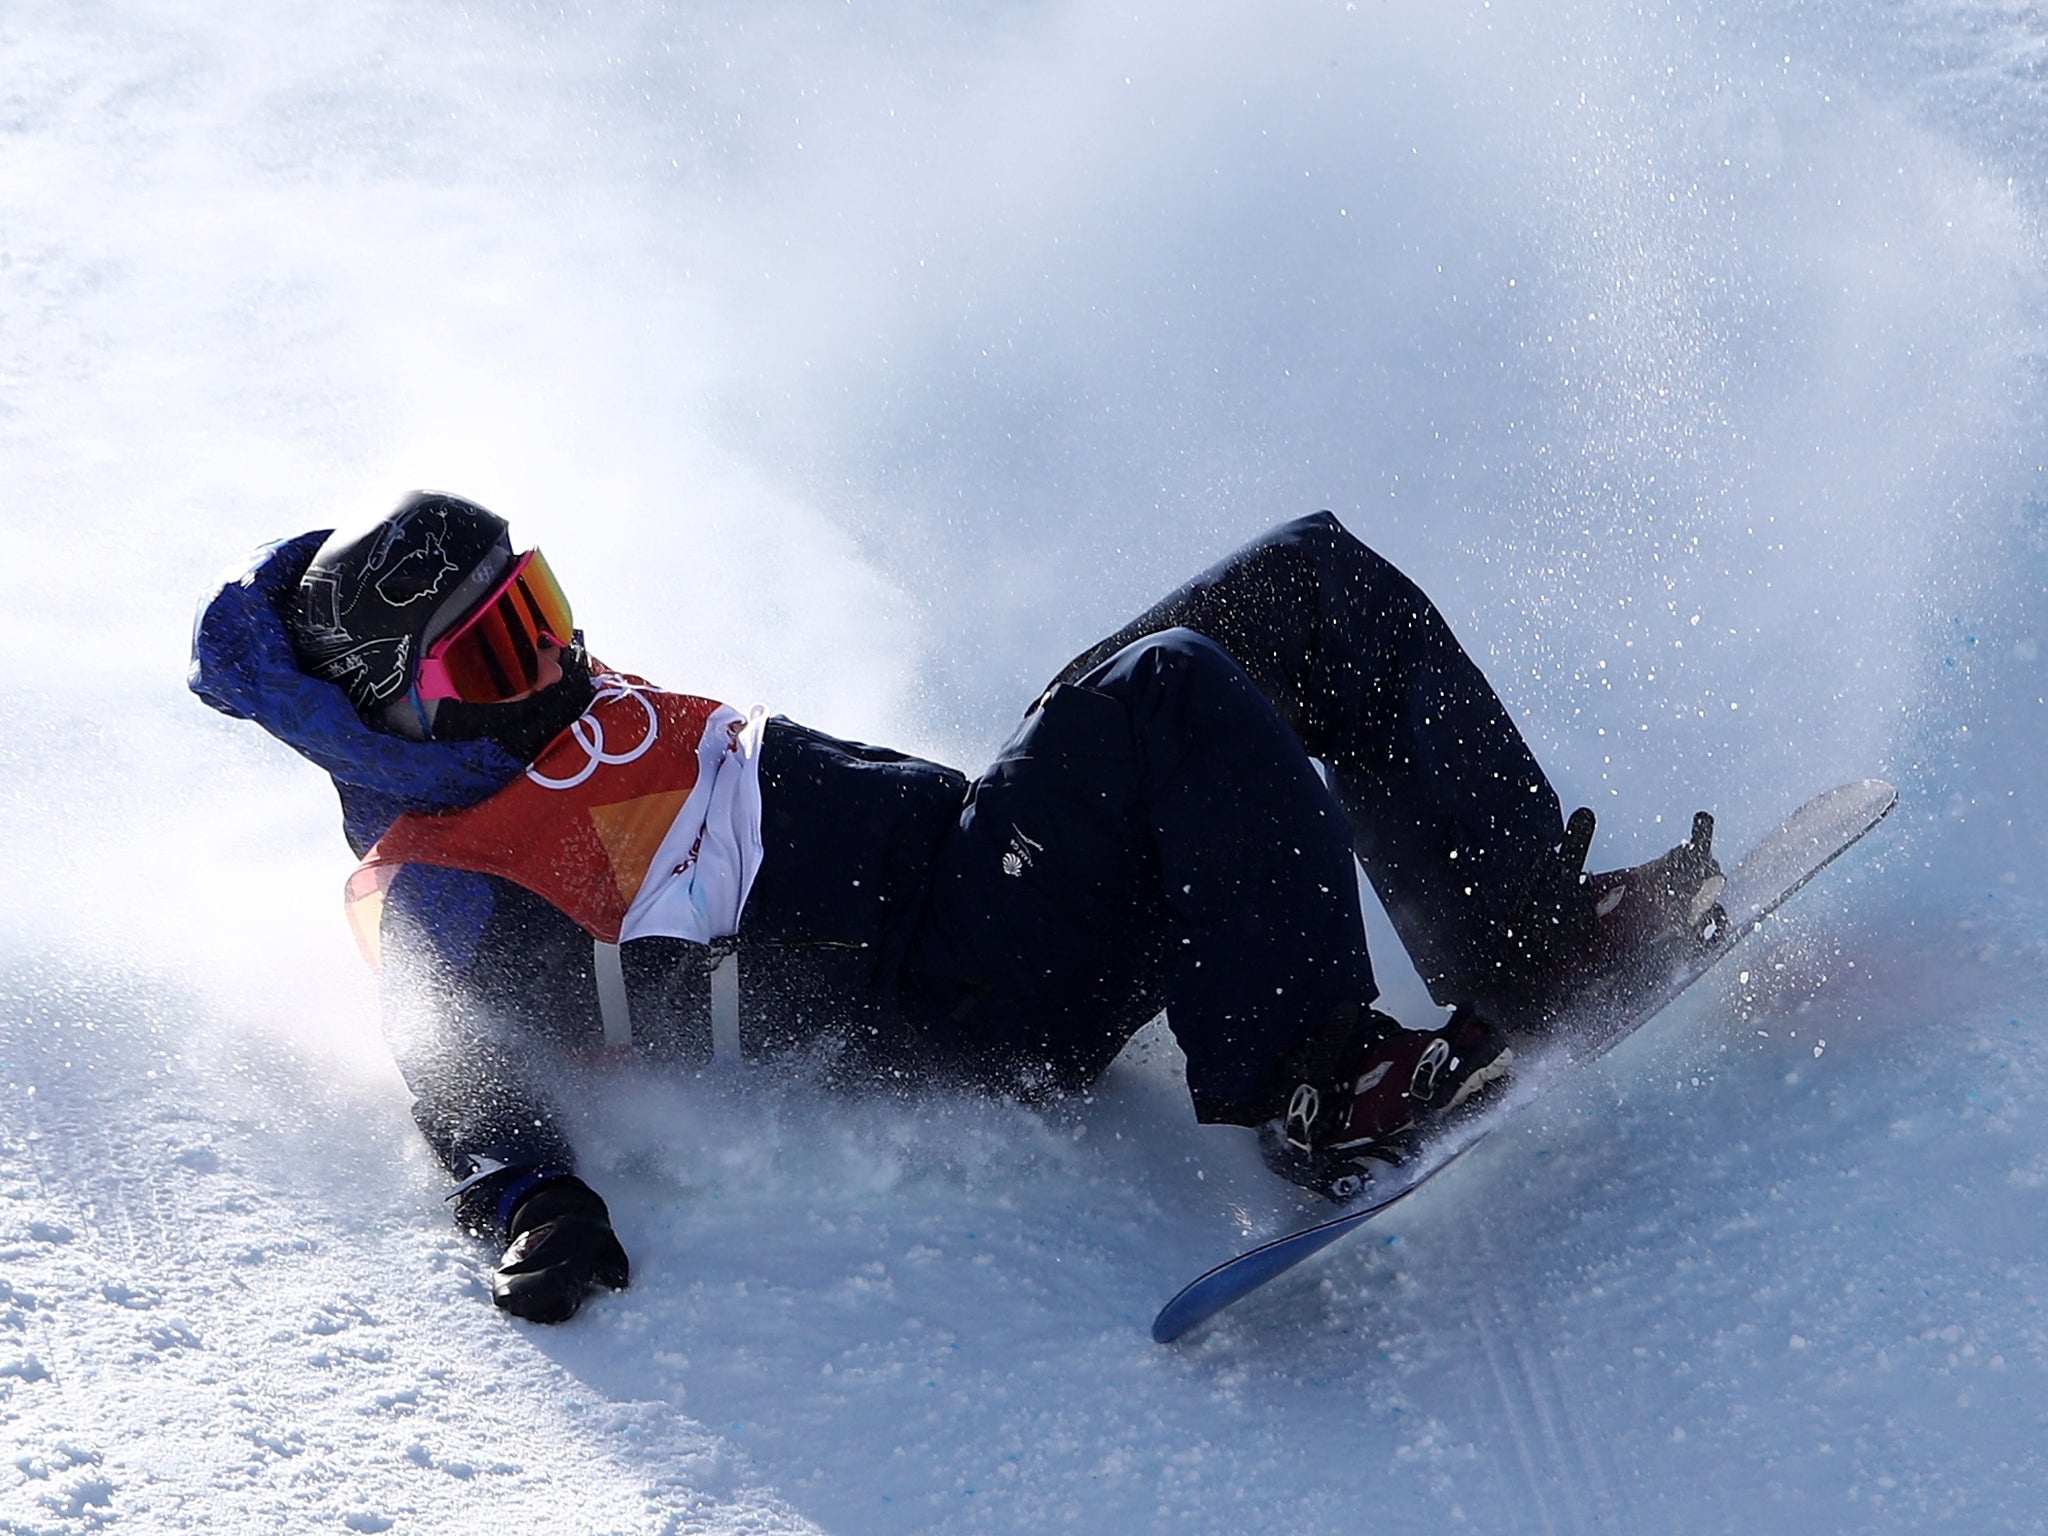 Aimee Fuller suffered a nasty fall on her second run in the snowboard slopestyle final